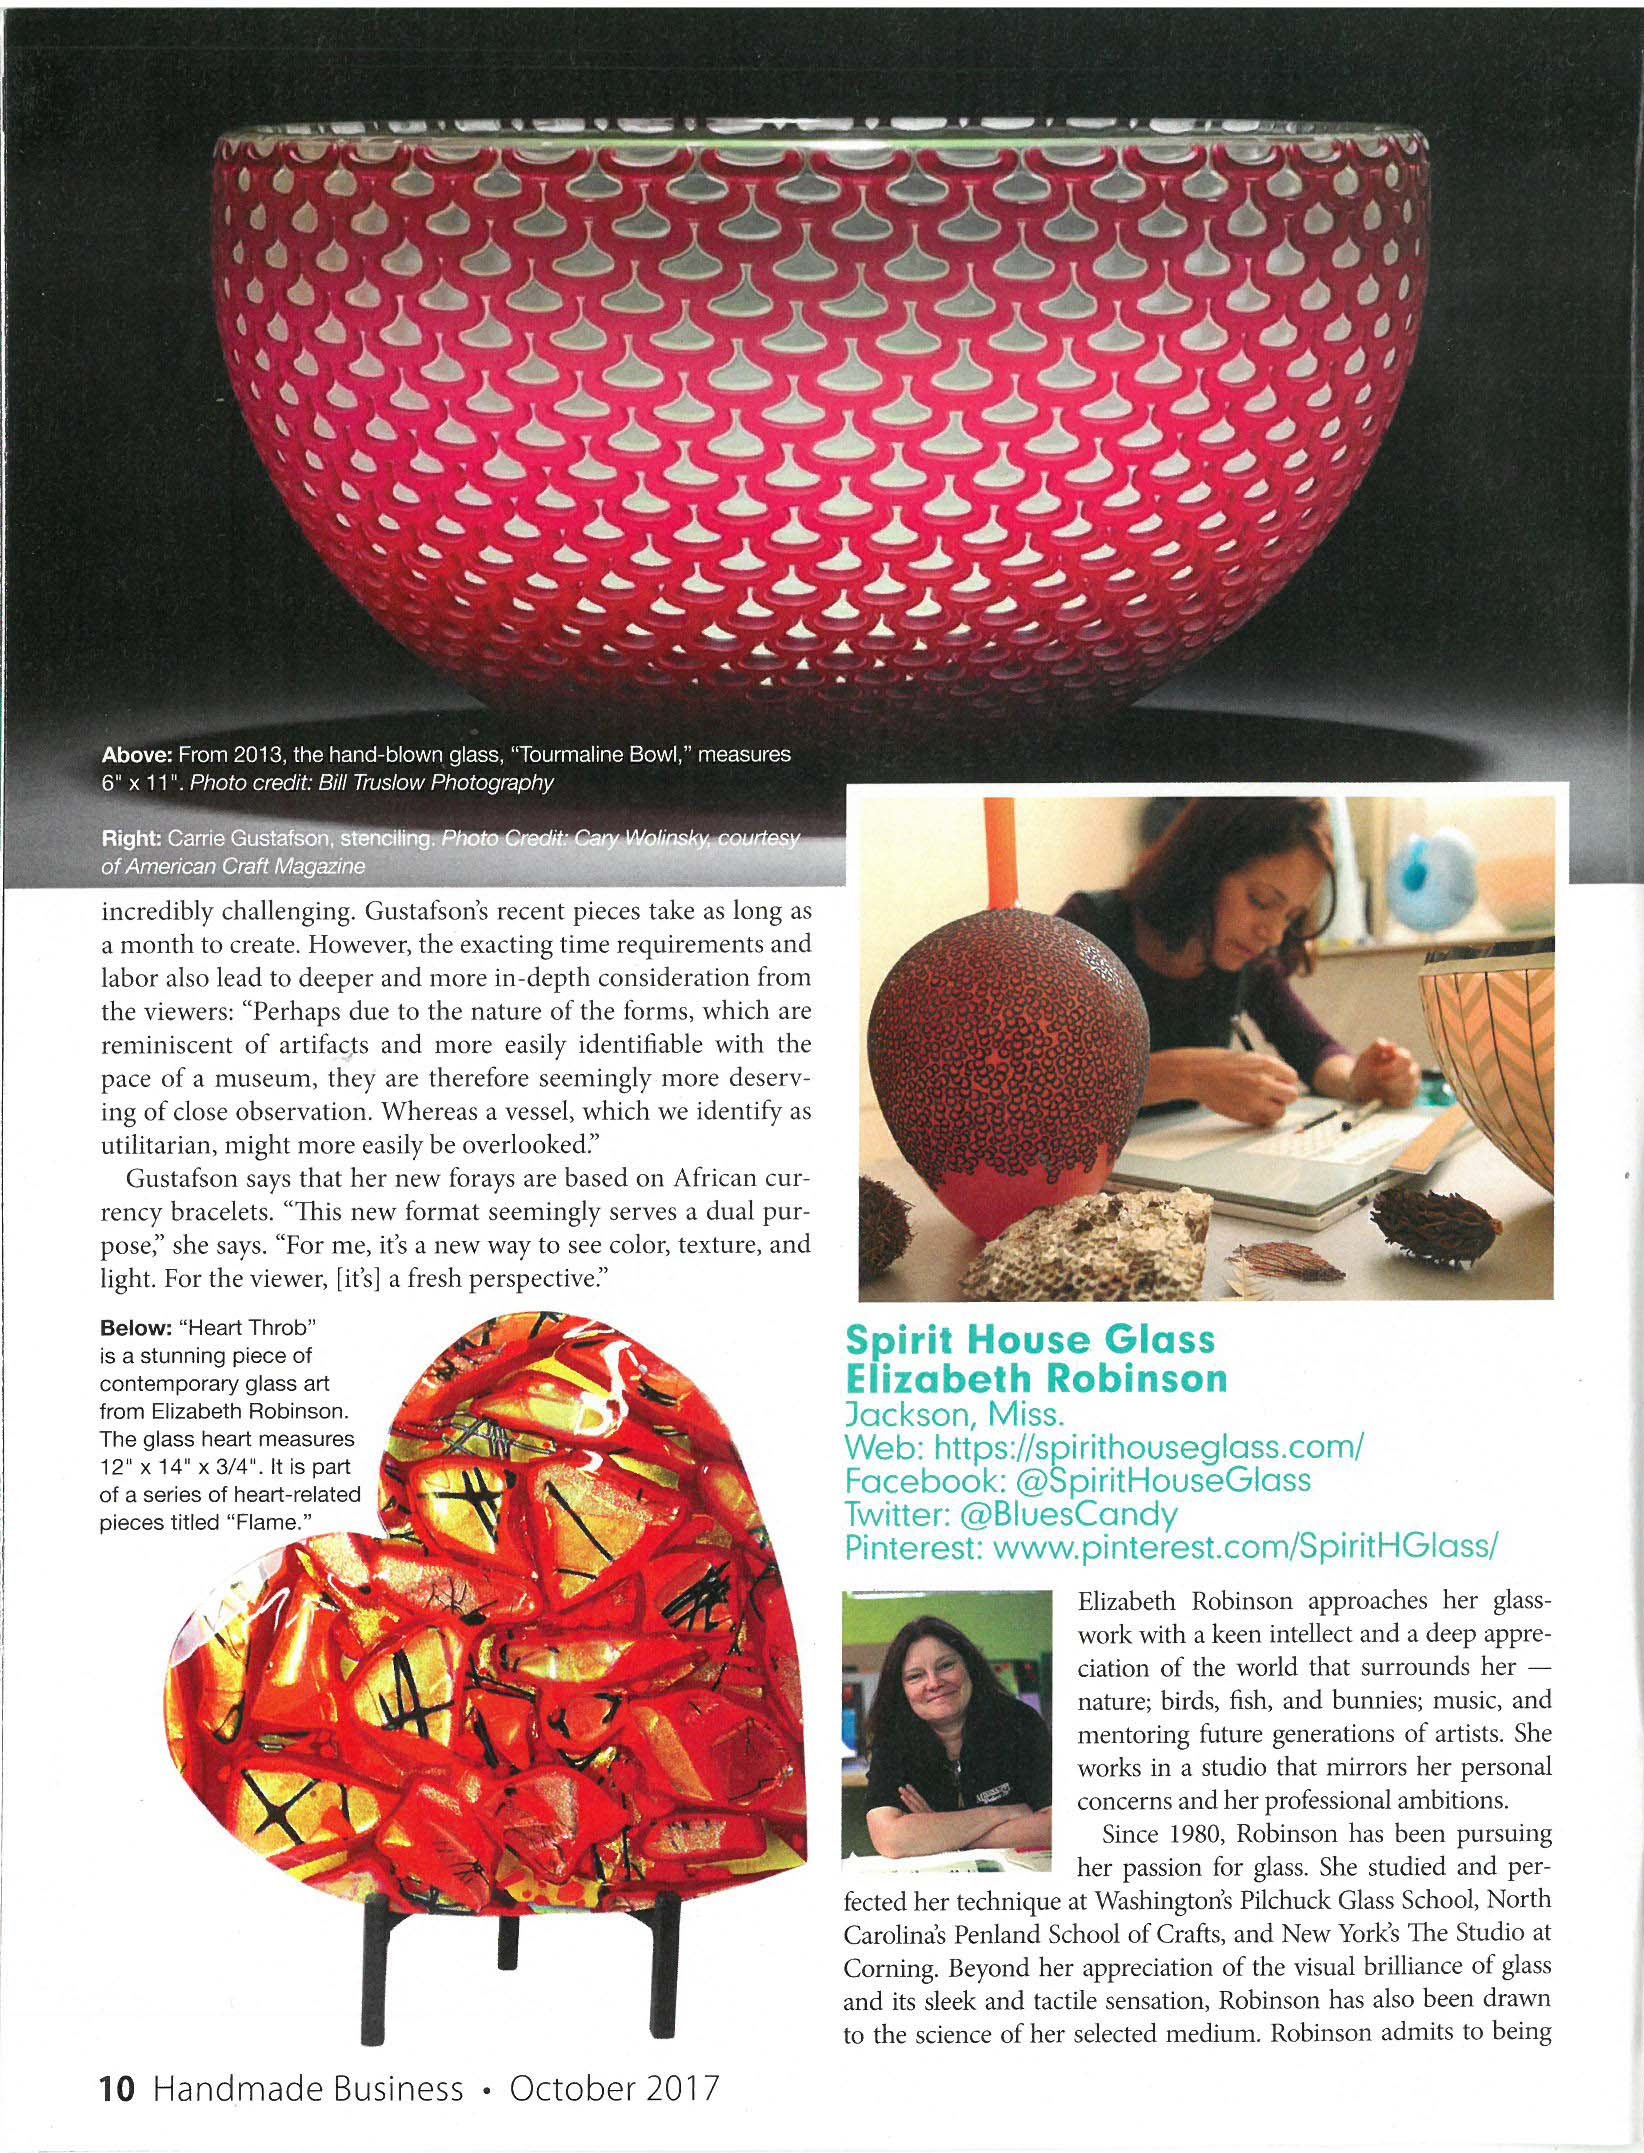 Optical Illusions article featuring Carrie Gustafson and her hand-blown glass creations